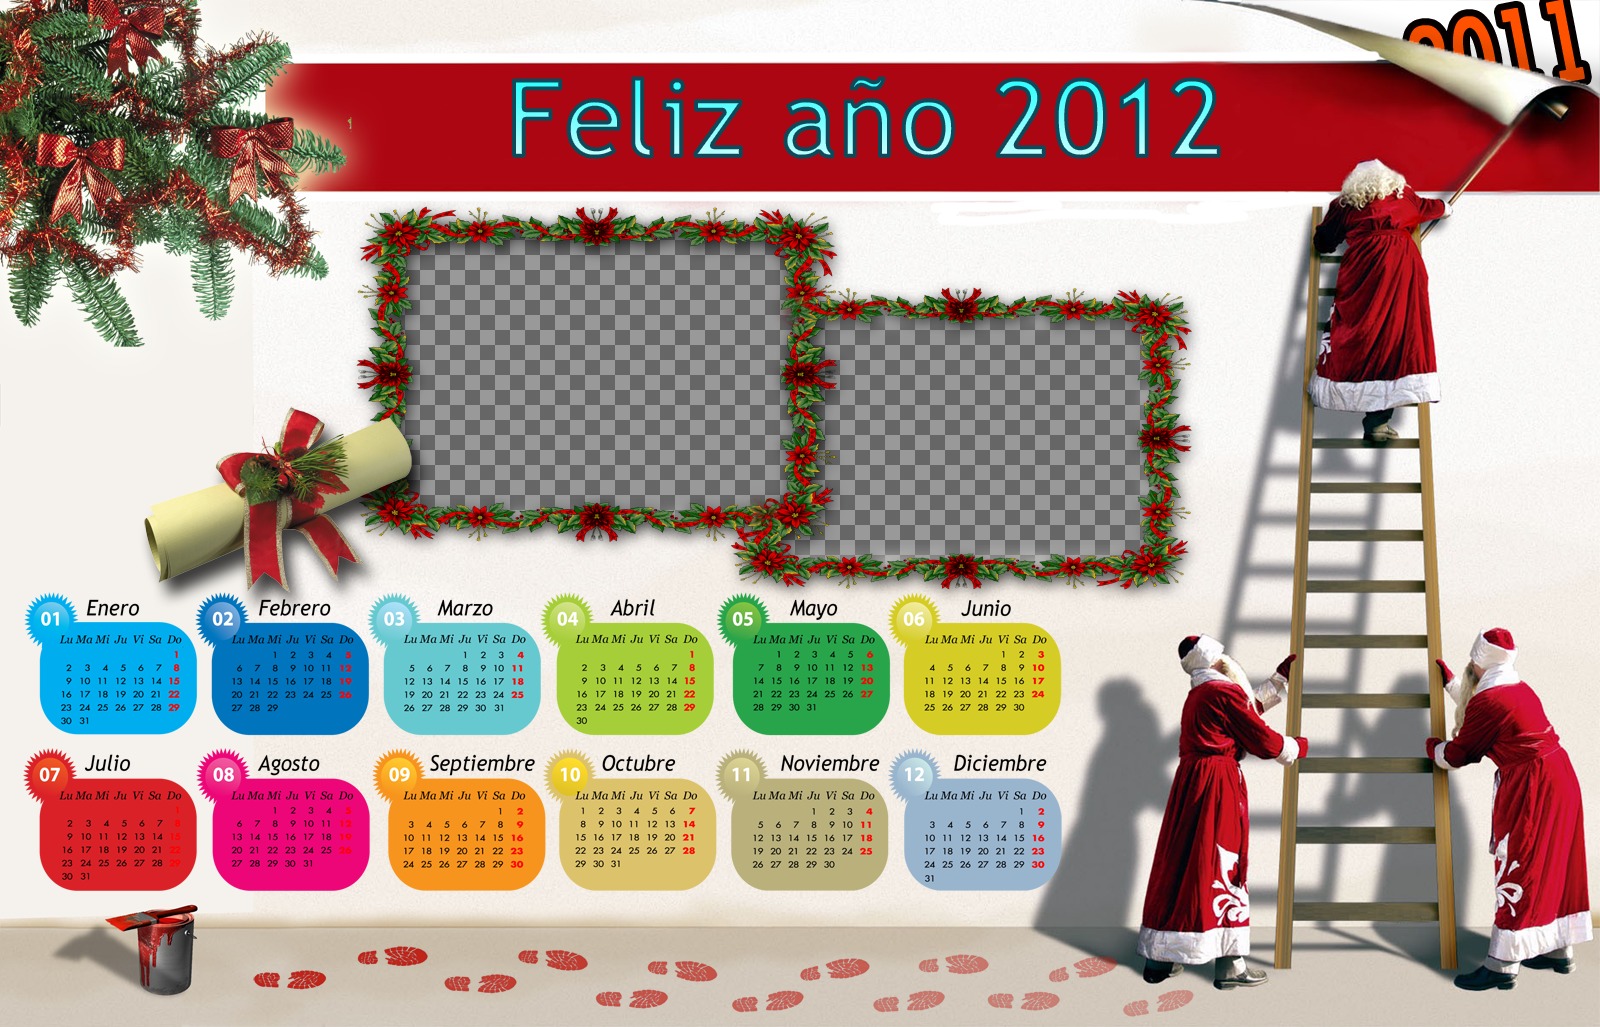 Calendar 2012 with months coloresy Christmas and Santa Claus..